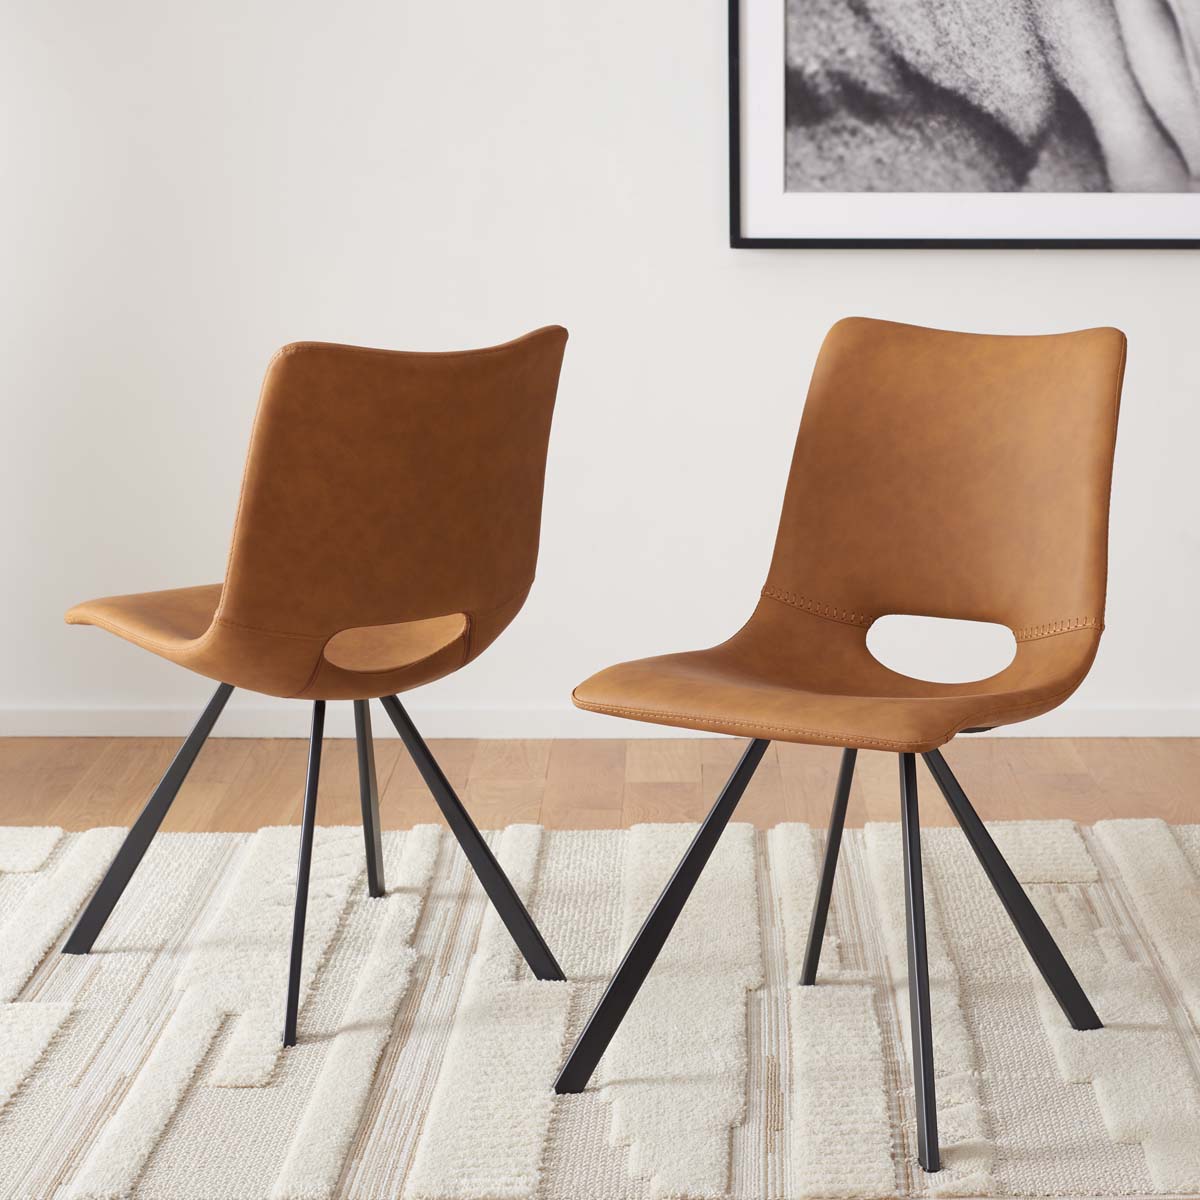 Safavieh Mika Dining Chair (Set of 2) , DCH3009